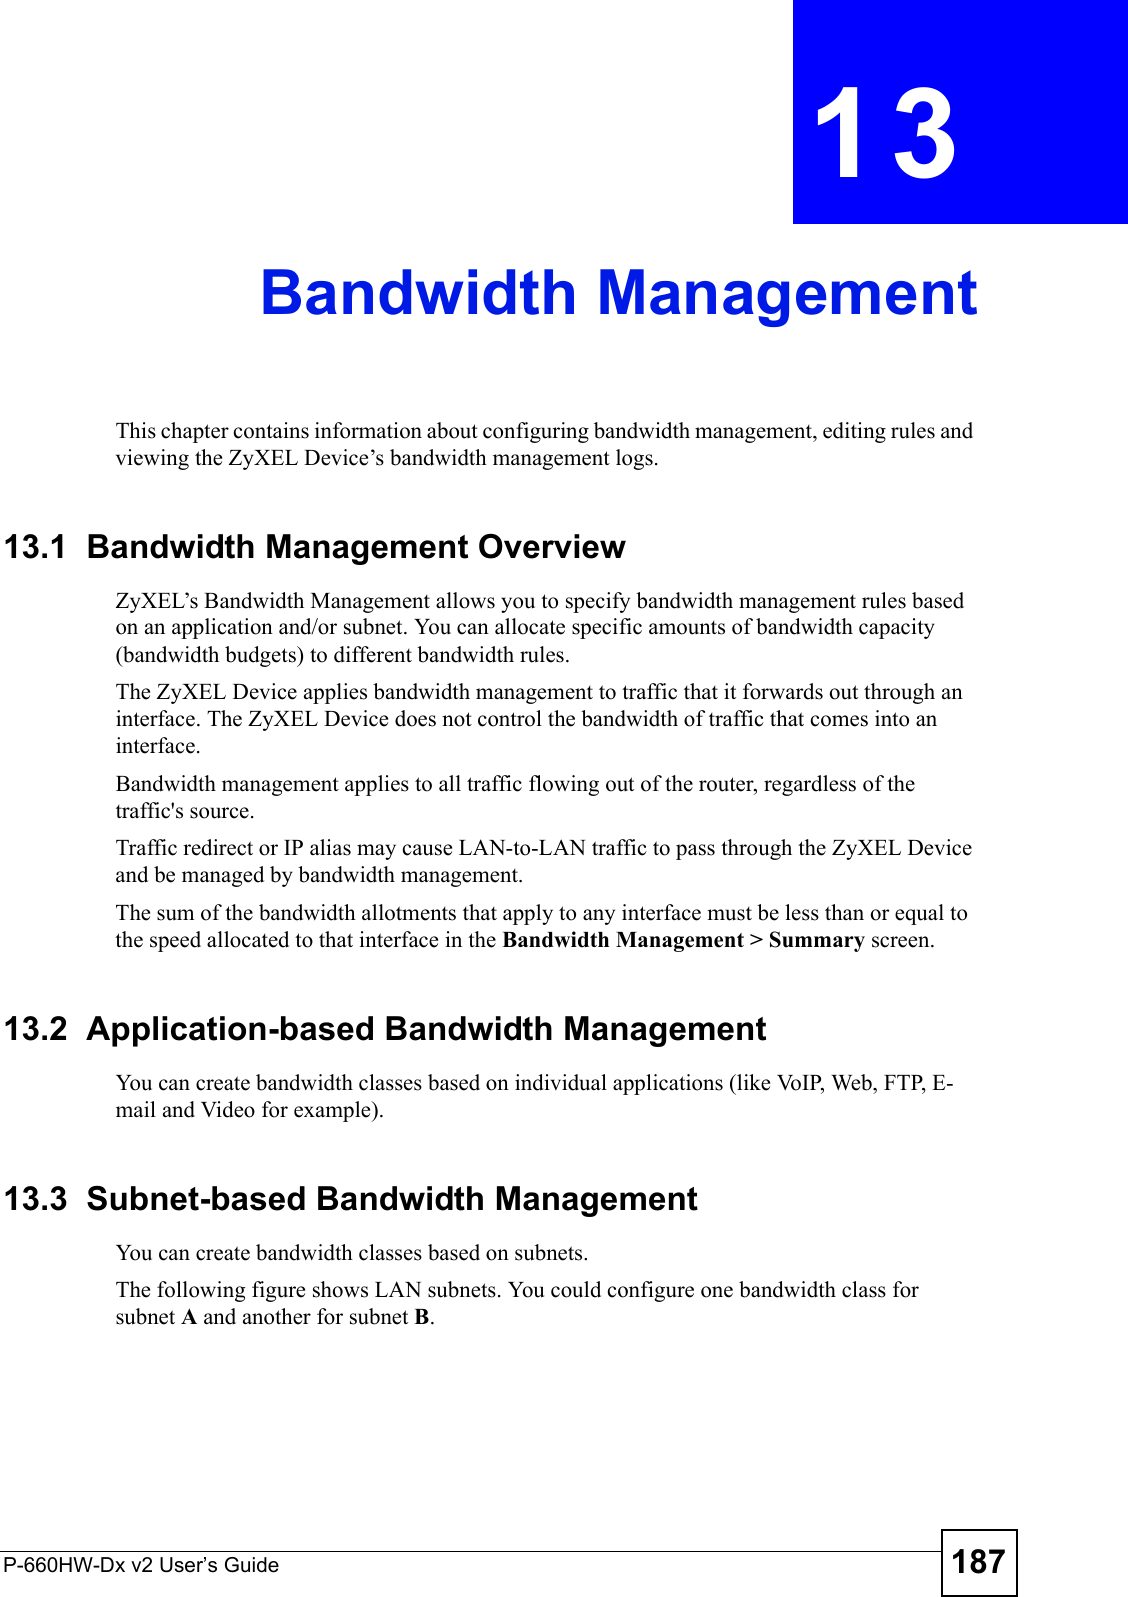 P-660HW-Dx v2 User’s Guide 187CHAPTER  13 Bandwidth ManagementThis chapter contains information about configuring bandwidth management, editing rules and viewing the ZyXEL Device’s bandwidth management logs.13.1  Bandwidth Management Overview ZyXEL’s Bandwidth Management allows you to specify bandwidth management rules based on an application and/or subnet. You can allocate specific amounts of bandwidth capacity (bandwidth budgets) to different bandwidth rules. The ZyXEL Device applies bandwidth management to traffic that it forwards out through an interface. The ZyXEL Device does not control the bandwidth of traffic that comes into an interface.Bandwidth management applies to all traffic flowing out of the router, regardless of the traffic&apos;s source.Traffic redirect or IP alias may cause LAN-to-LAN traffic to pass through the ZyXEL Device and be managed by bandwidth management. The sum of the bandwidth allotments that apply to any interface must be less than or equal to the speed allocated to that interface in the Bandwidth Management &gt; Summary screen.13.2  Application-based Bandwidth ManagementYou can create bandwidth classes based on individual applications (like VoIP, Web, FTP, E-mail and Video for example).13.3  Subnet-based Bandwidth ManagementYou can create bandwidth classes based on subnets.The following figure shows LAN subnets. You could configure one bandwidth class for subnet A and another for subnet B. 